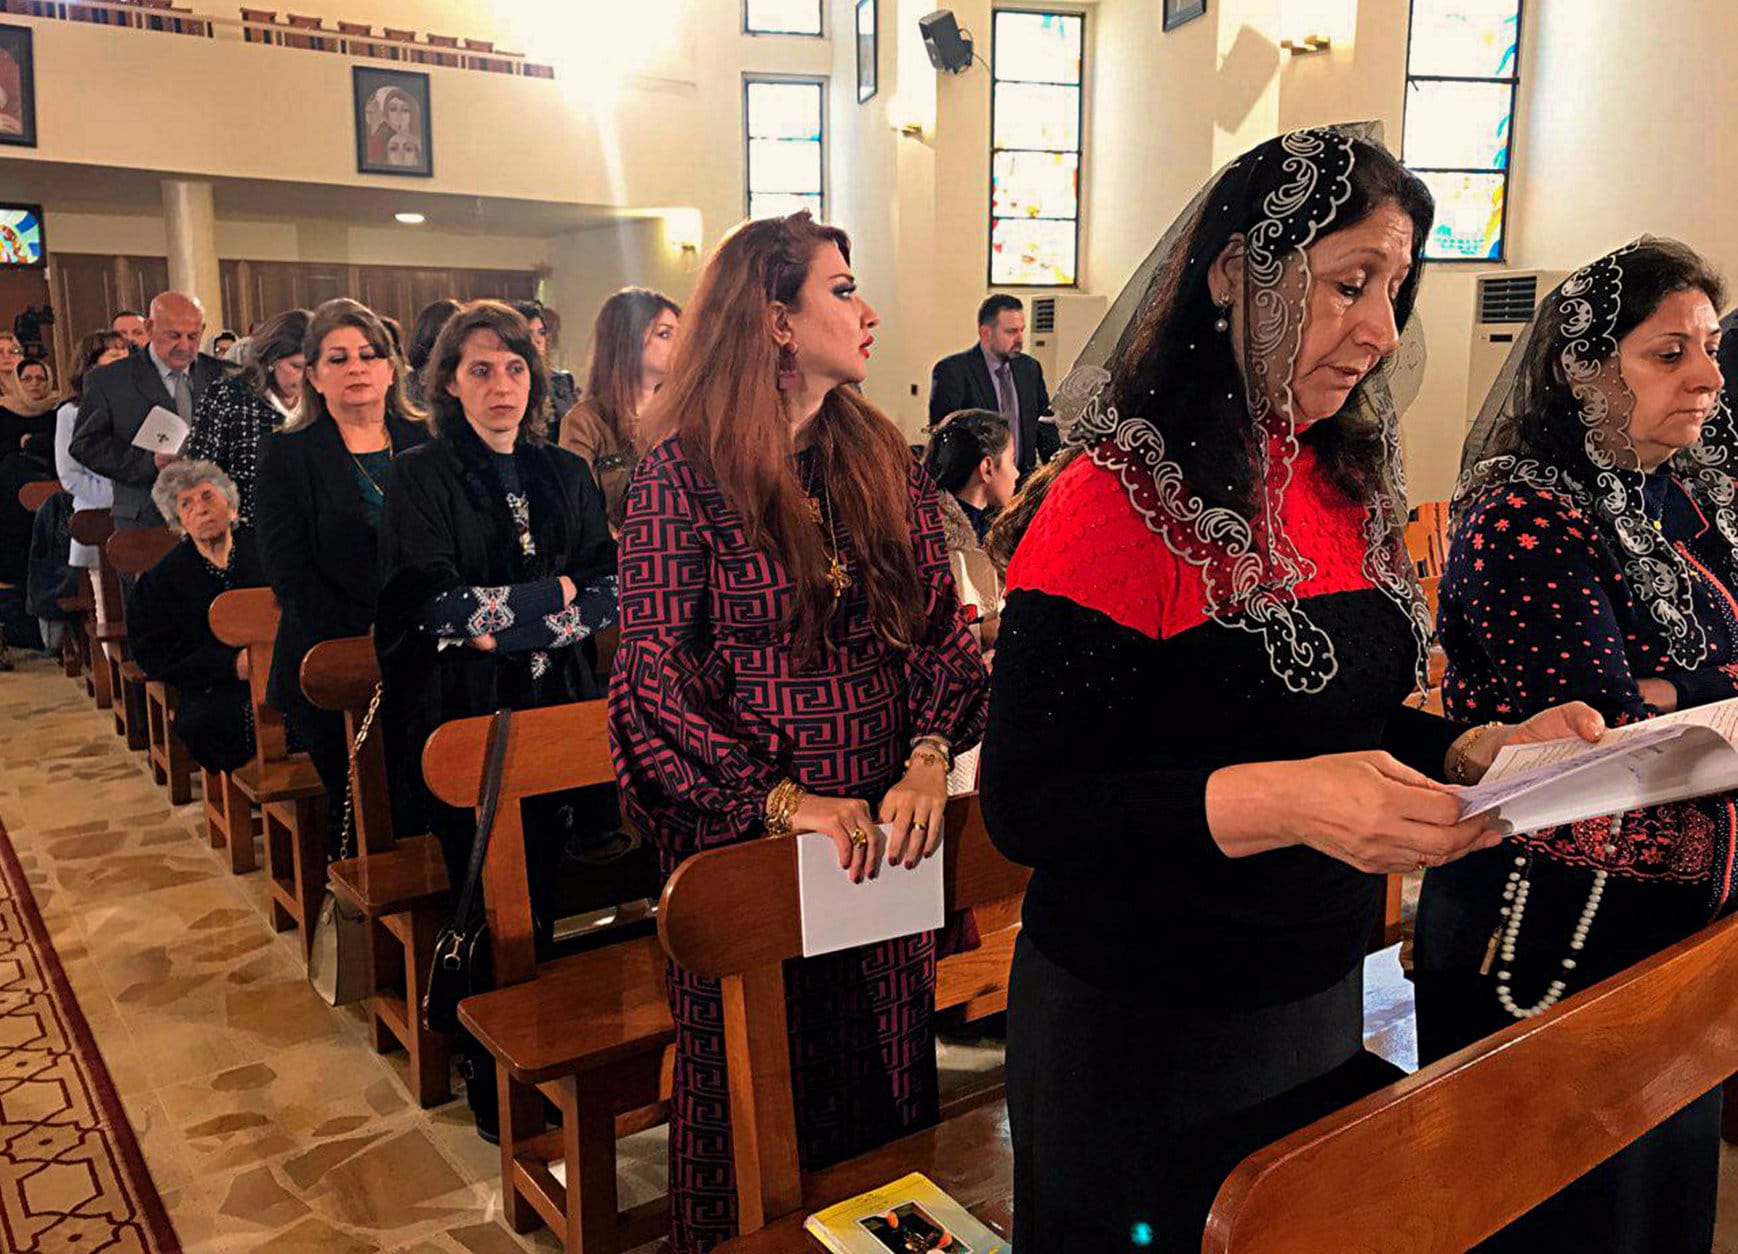 Iraqis pray during Christmas Mass at Mar Youssif Chaldean Church, in Baghdad, Iraq, Tuesday, Dec. 25, 2018. Although the number of Christians has dropped in Iraq, Christmas, a national holiday, is very popular in the capital. (AP Photo/Ali Abdul Hassan)